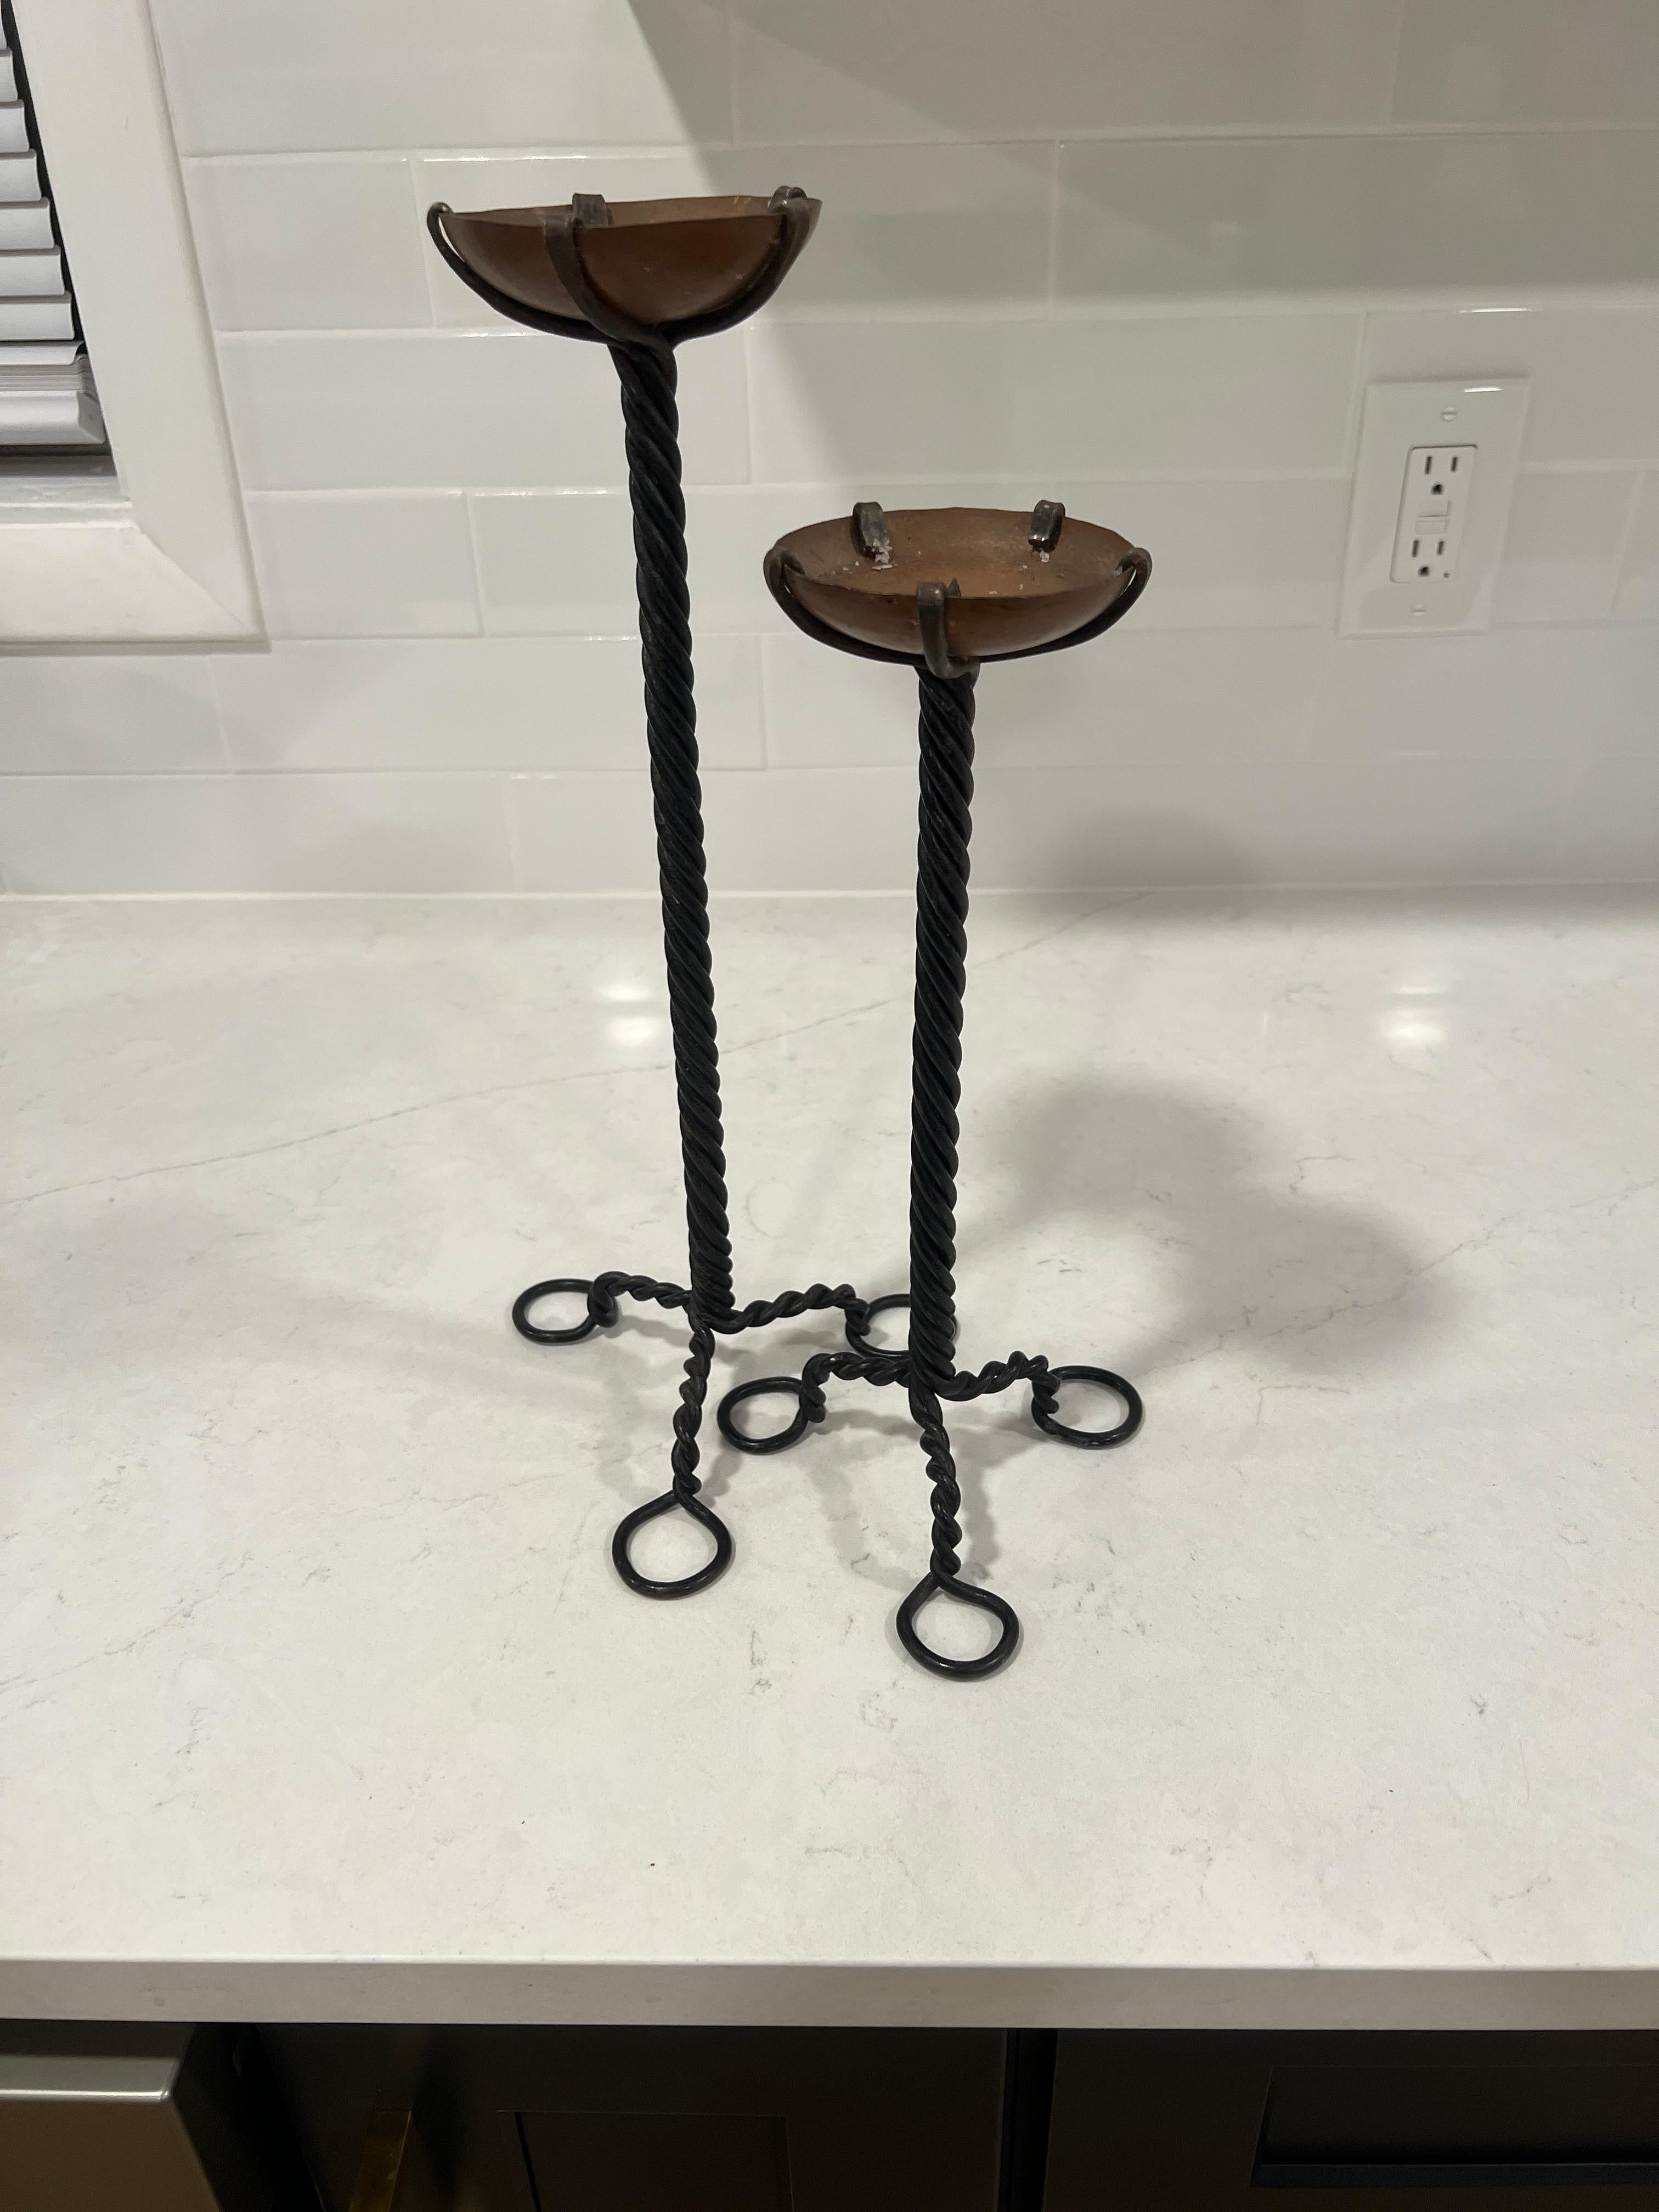 American, early 20th century.

A two piece grouping of Arts & Crafts Period candlesticks. Each constructed with a twisted wrought iron tripod stem and topped with a copper open bowl to top. Unmarked.

Large 14.875